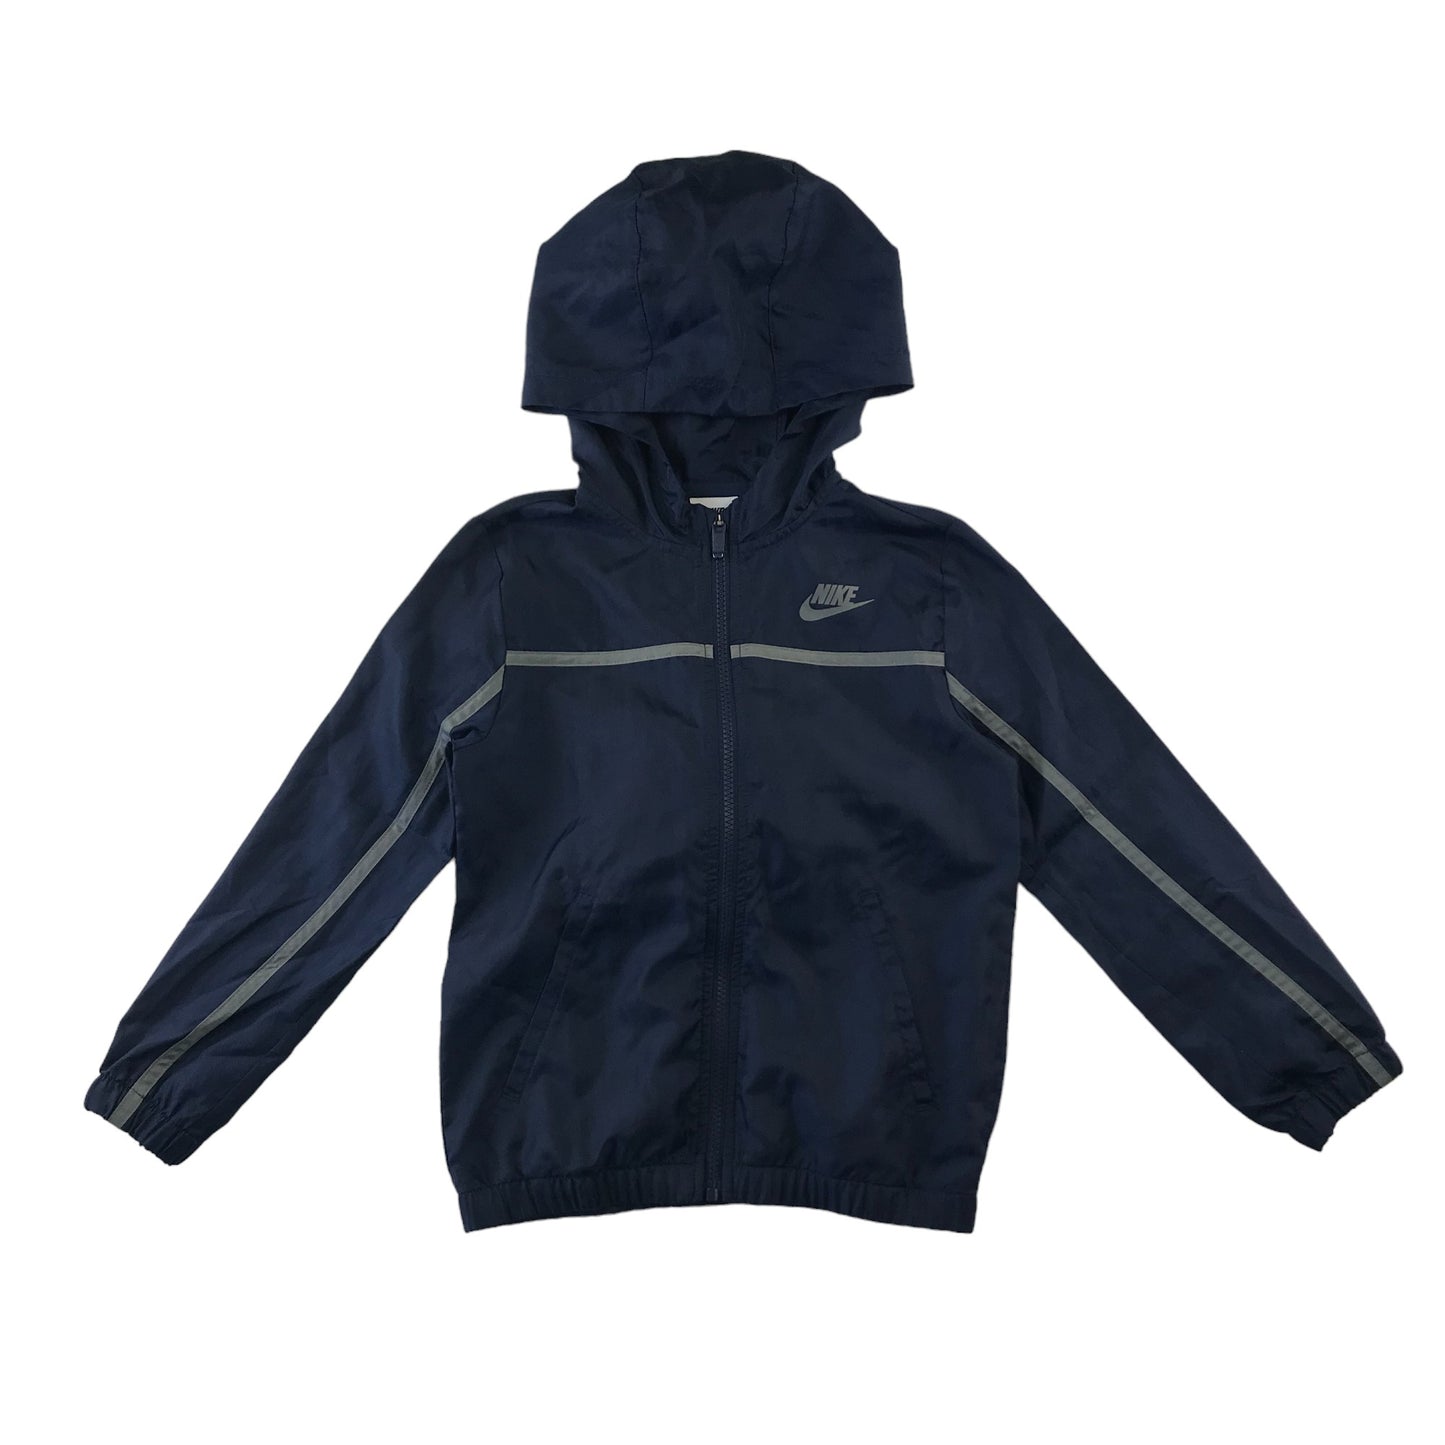 Nike light jacket 7 years navy with grey logo and line detail